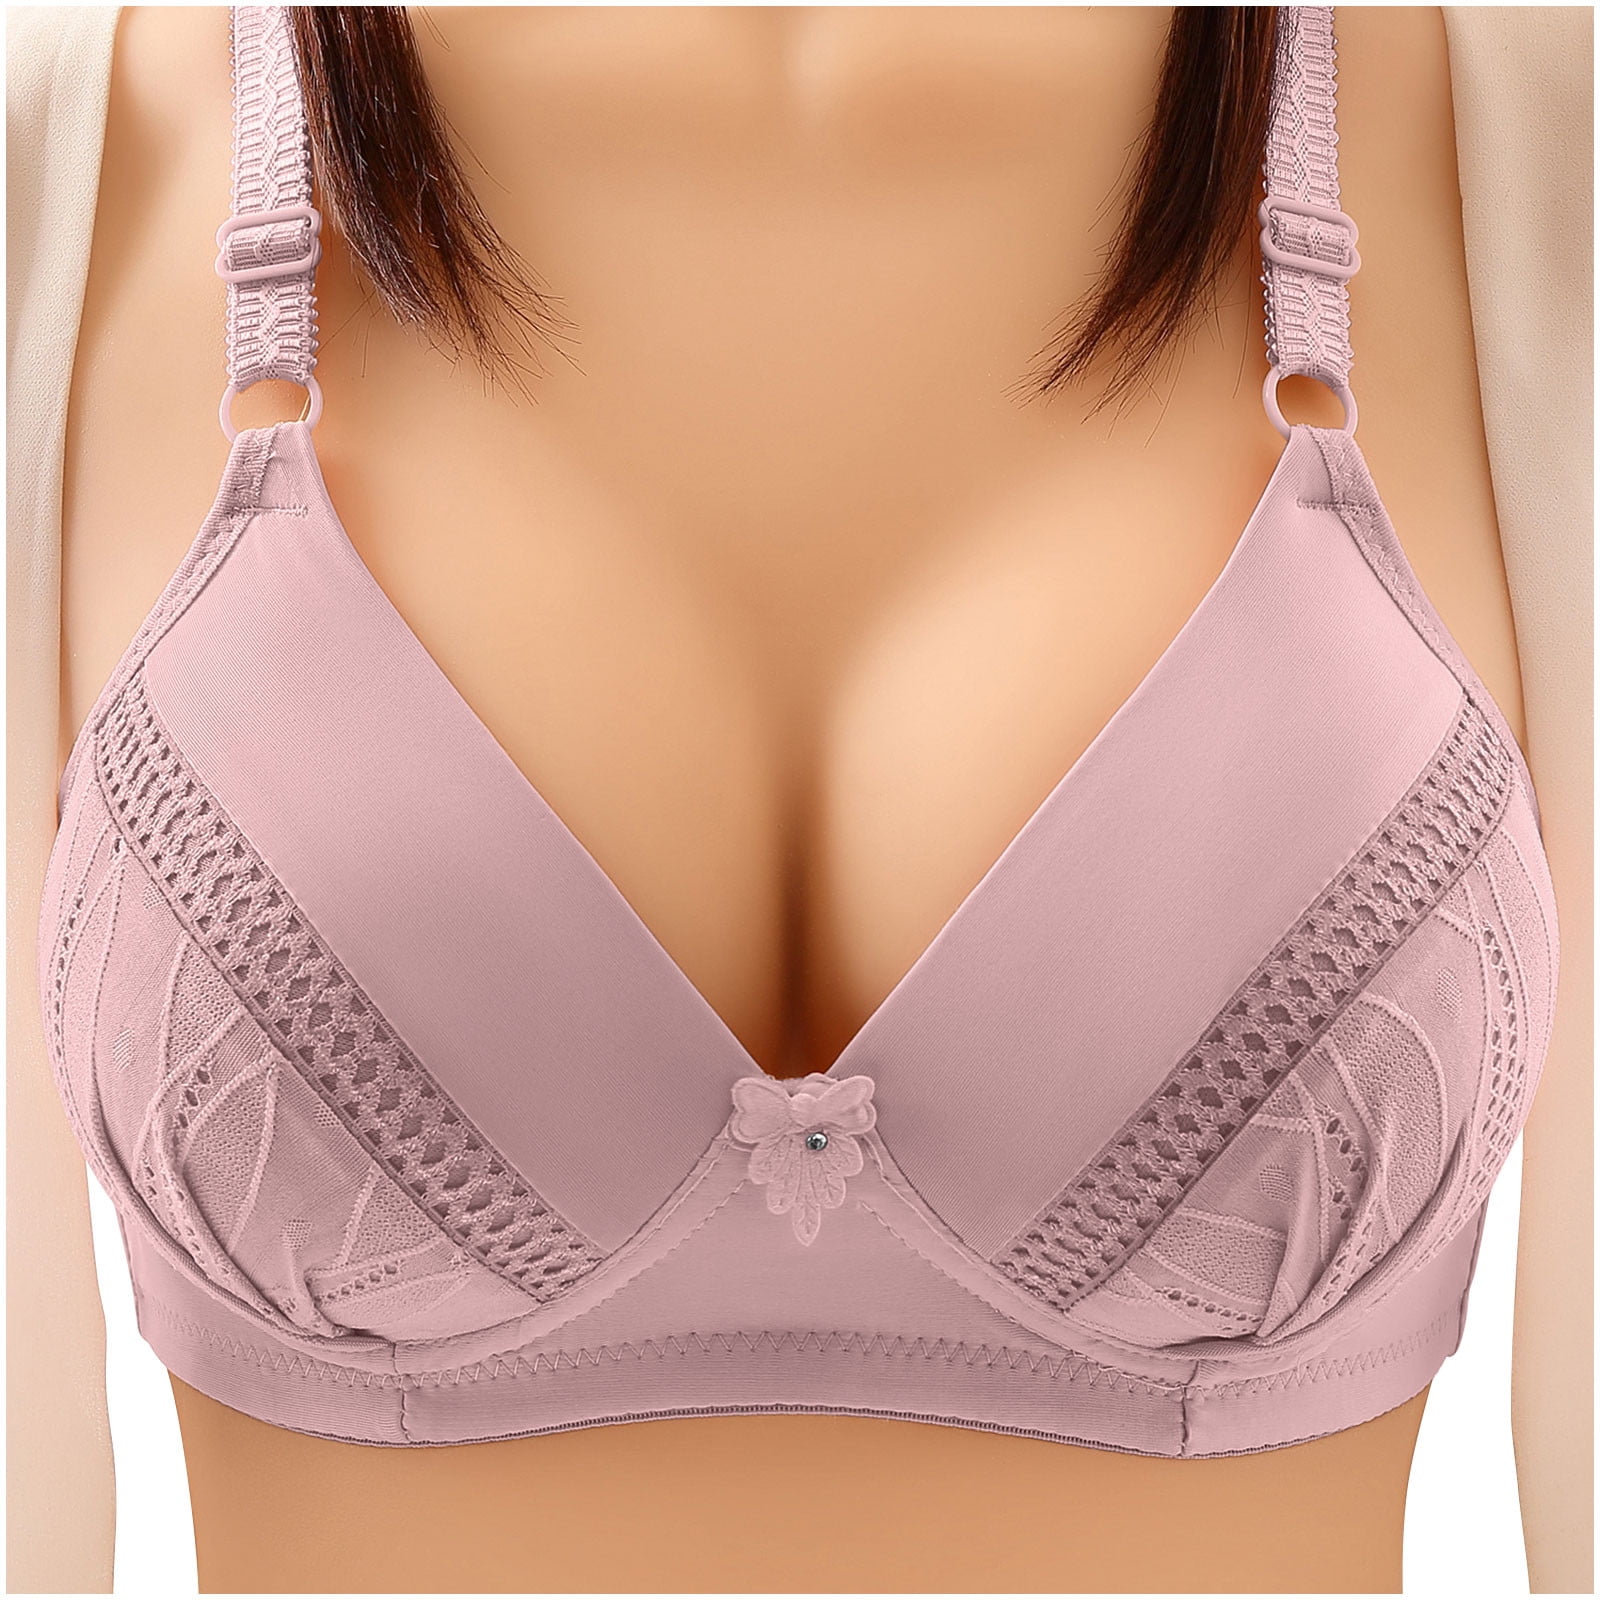 SELONE Nursing Bras No Underwire for Large Bust Maternity Soft for